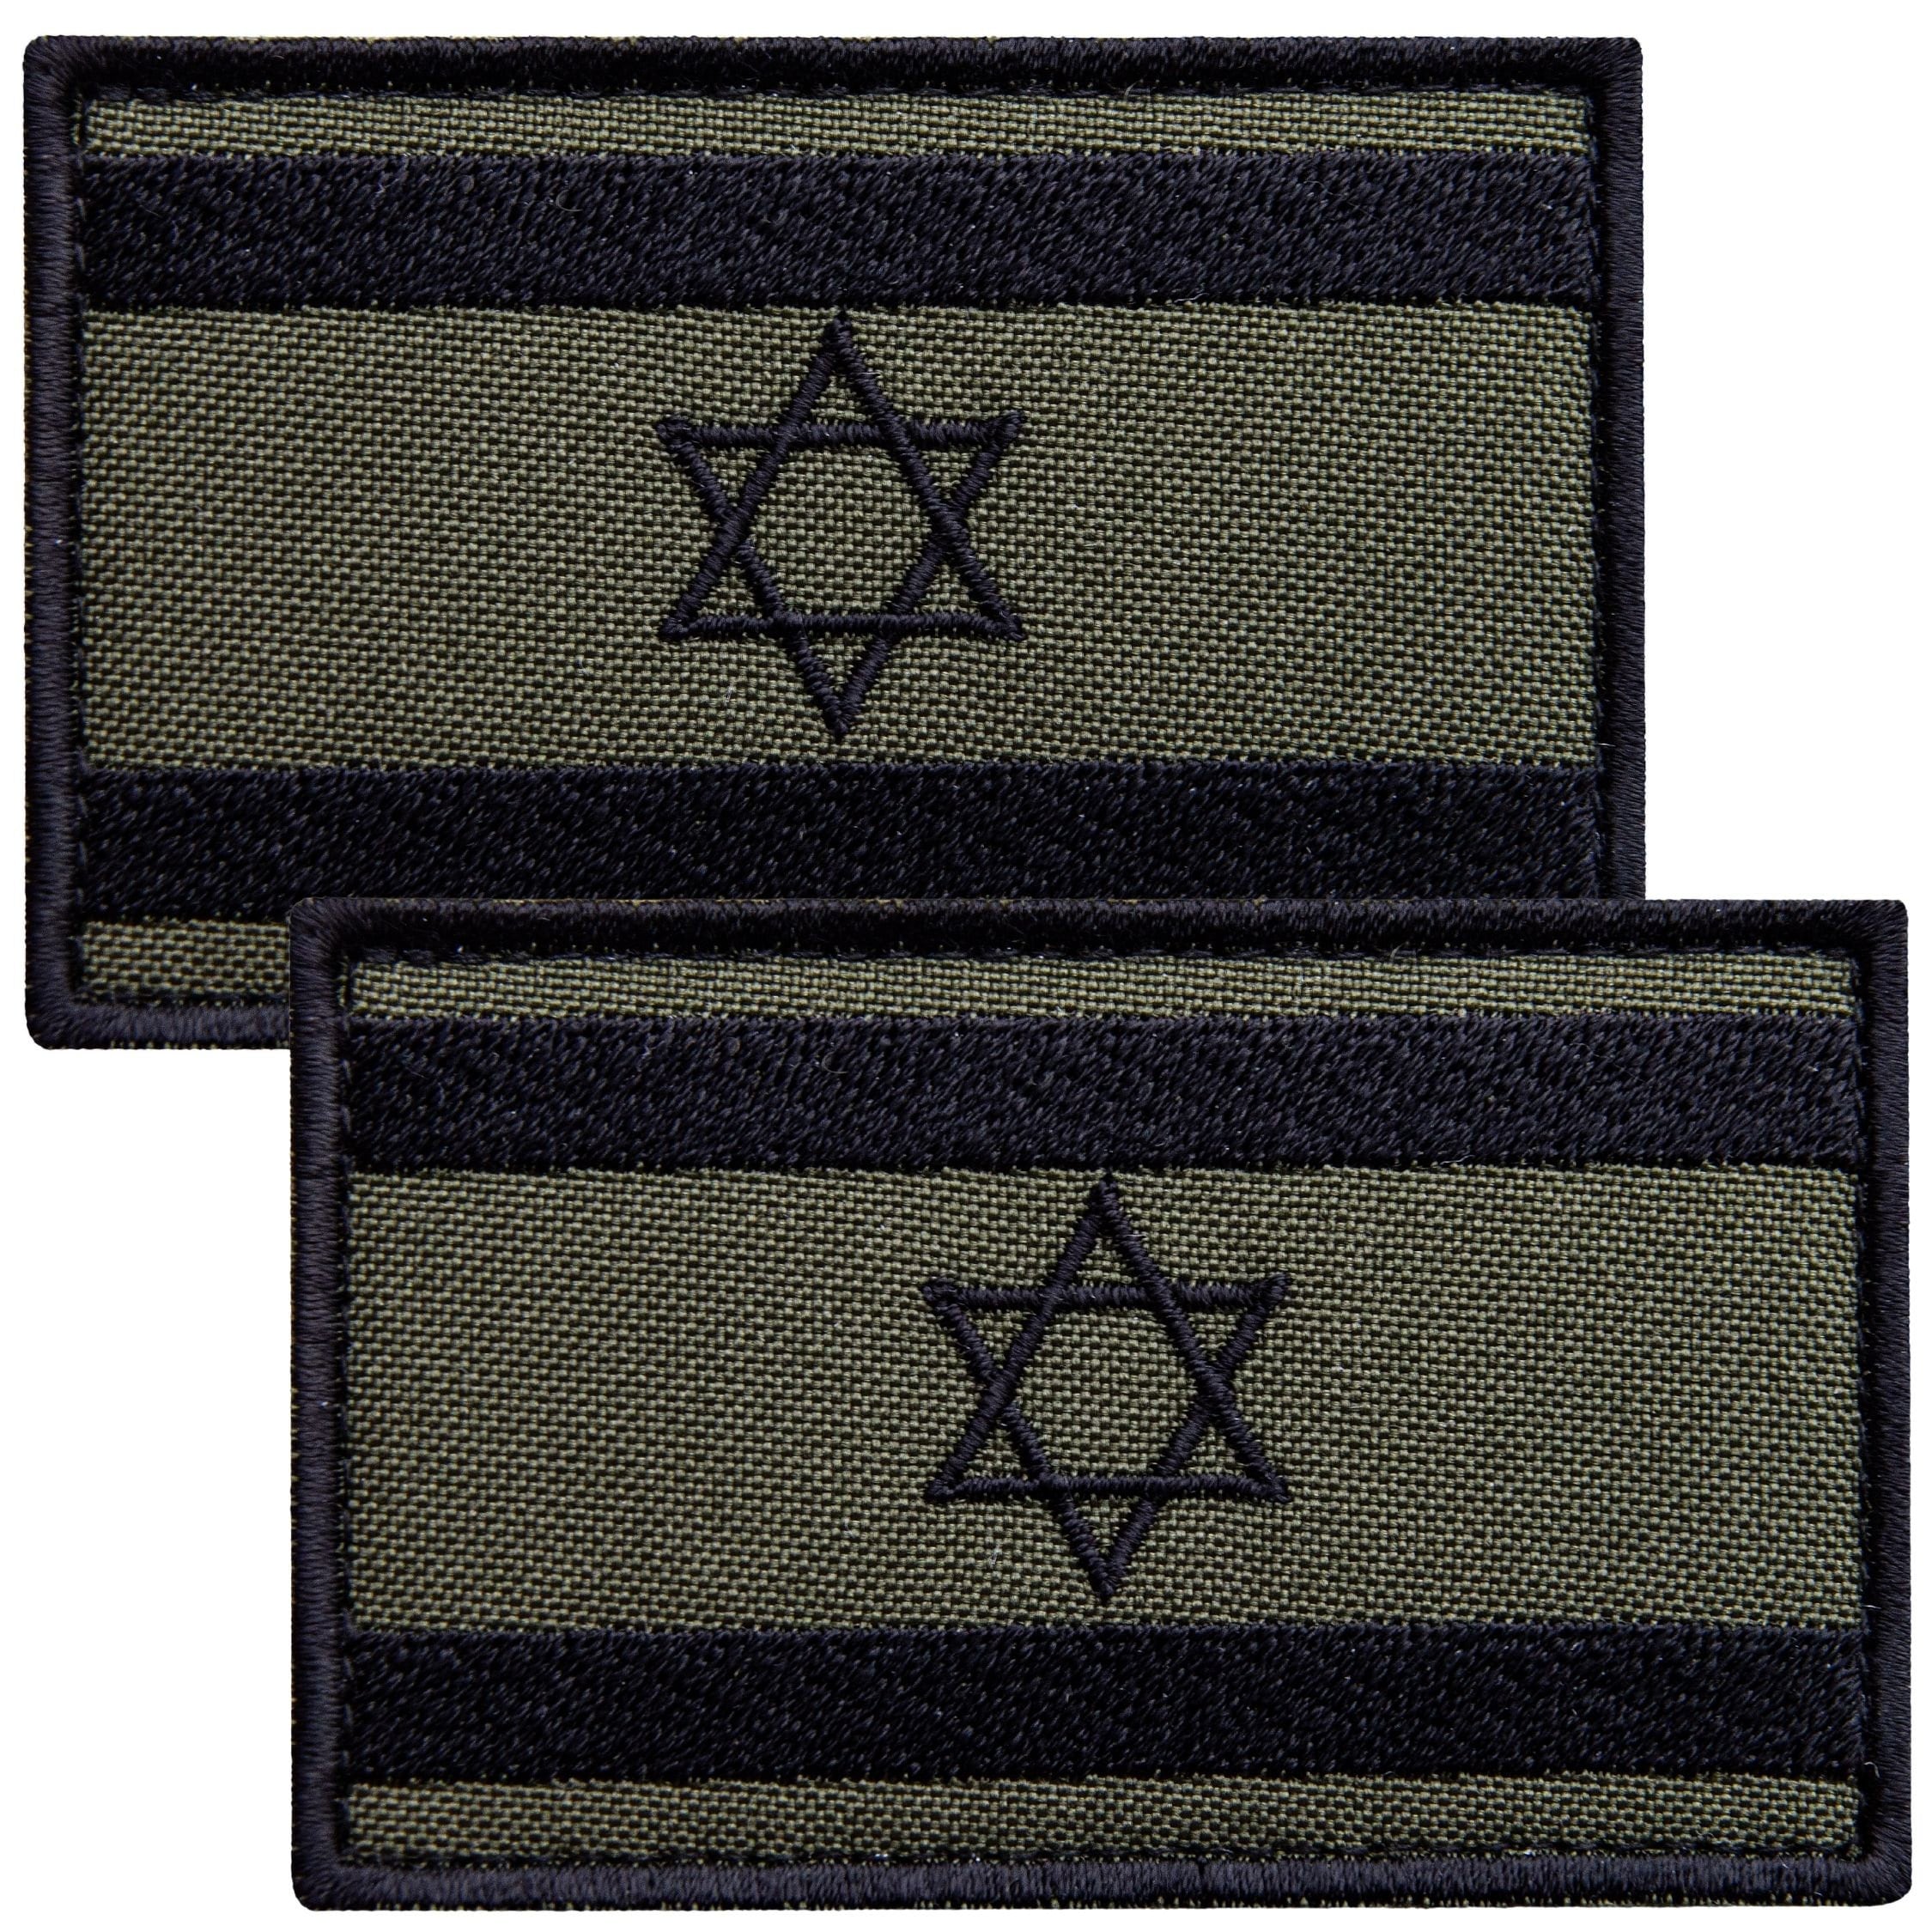 US / Israel Flag Patch Full Color, Round – Bomber Patches